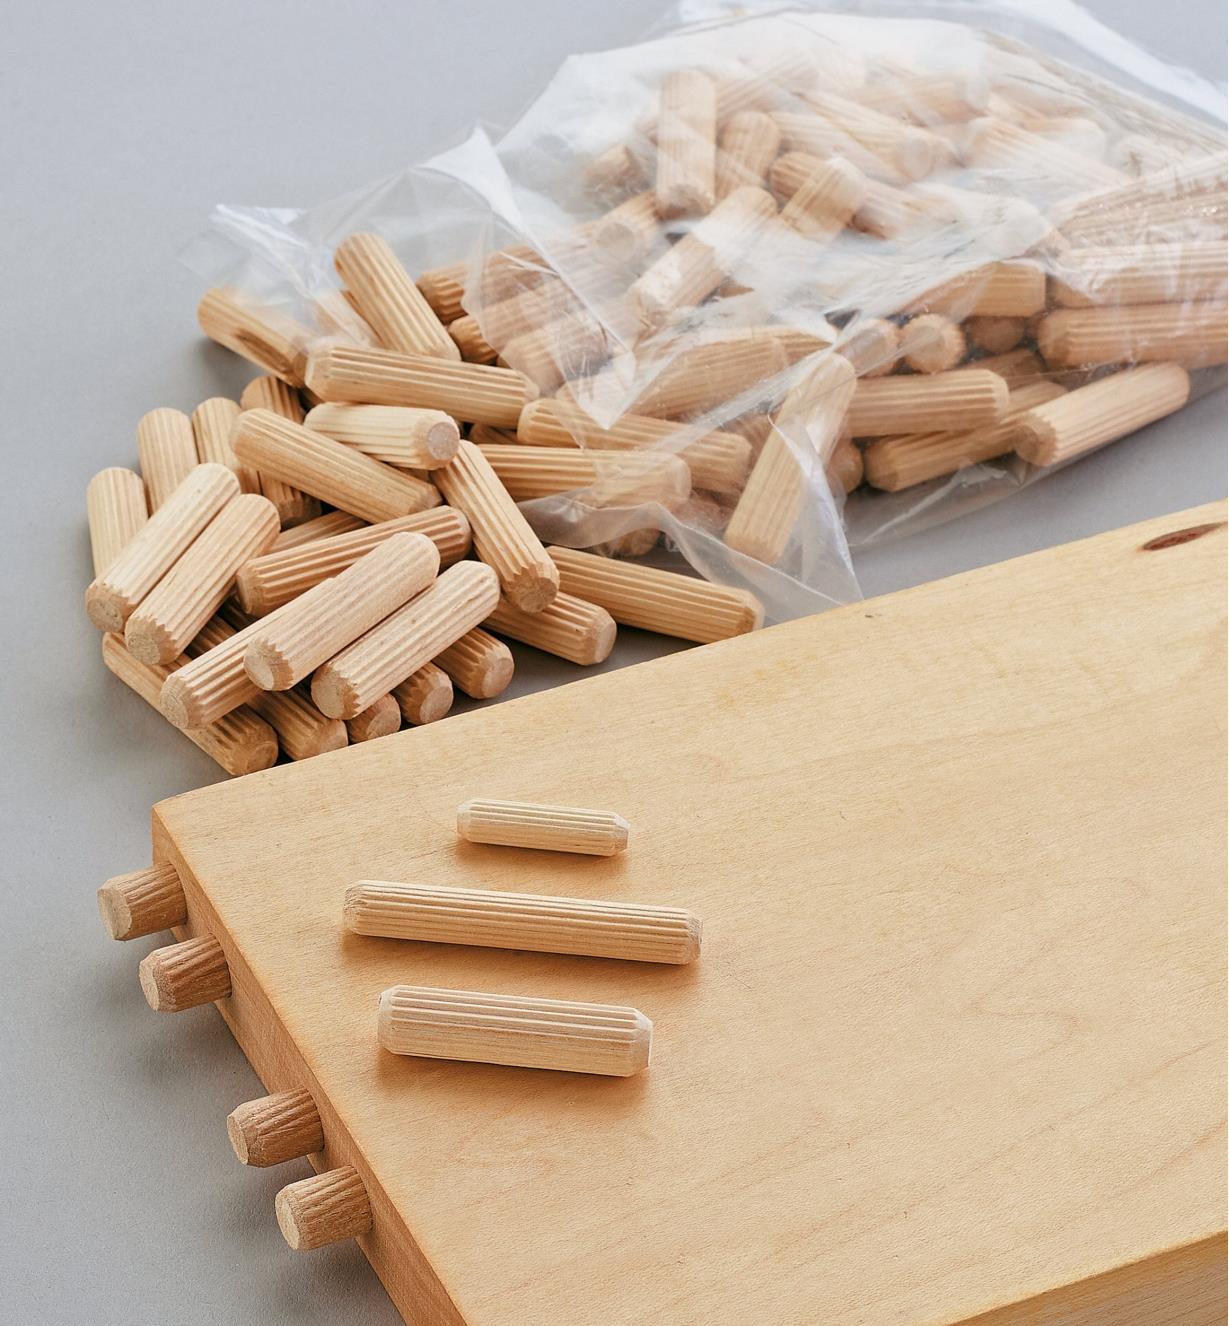 A shelf with dowels installed in the end and various dowels sitting on top and beside it